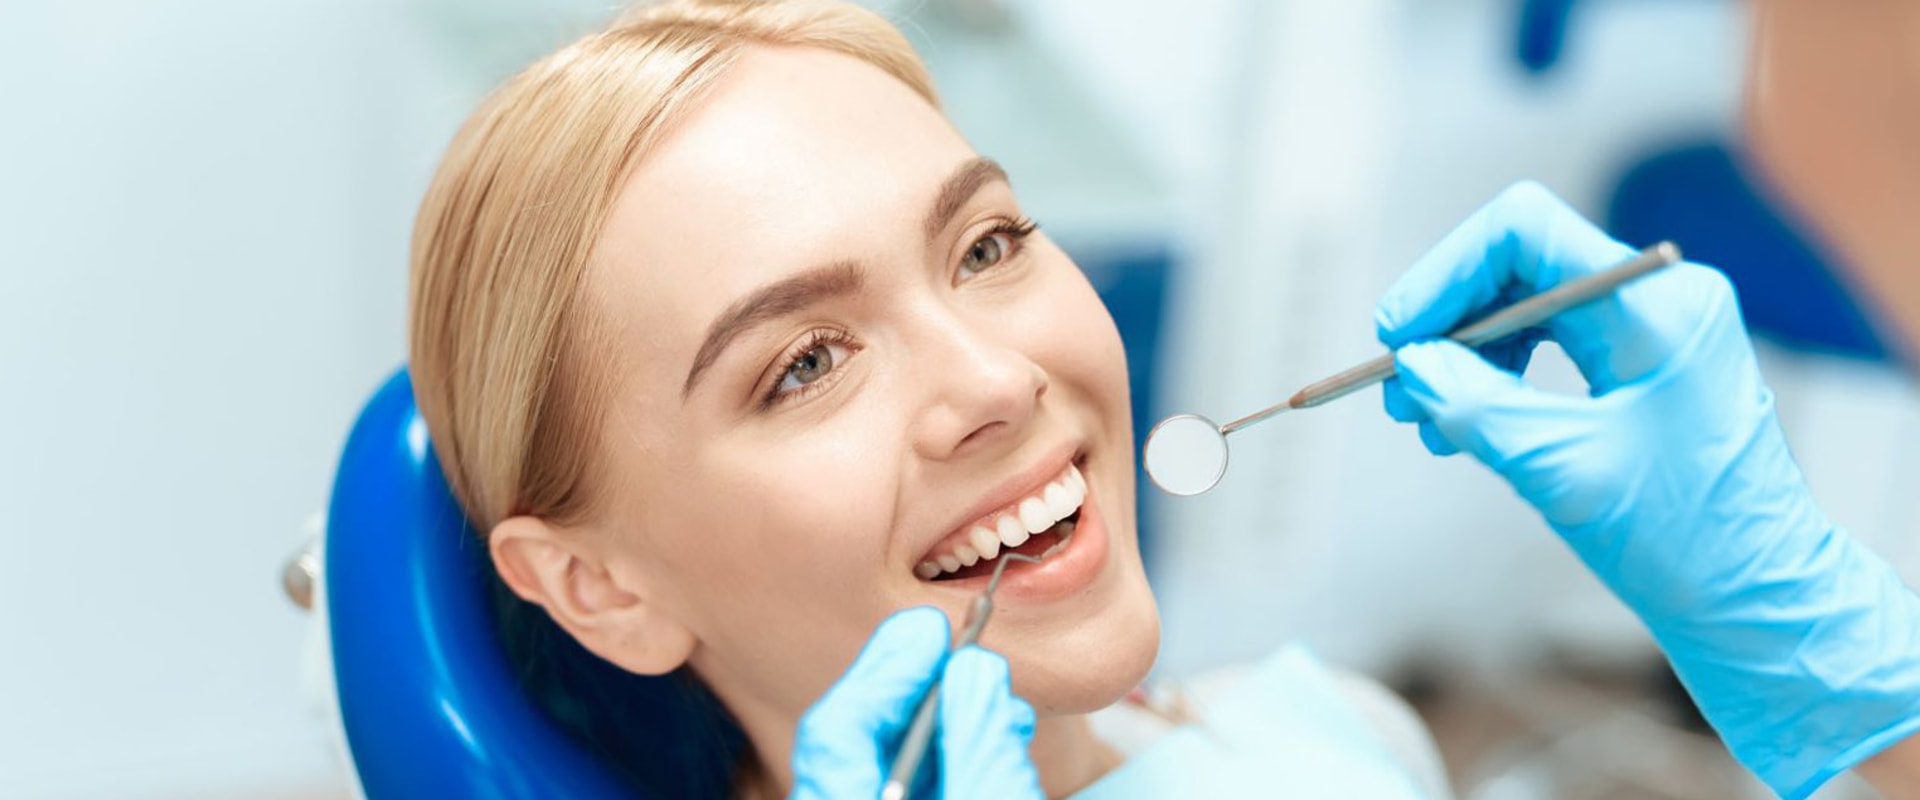 The Importance of Early Dental Checkups